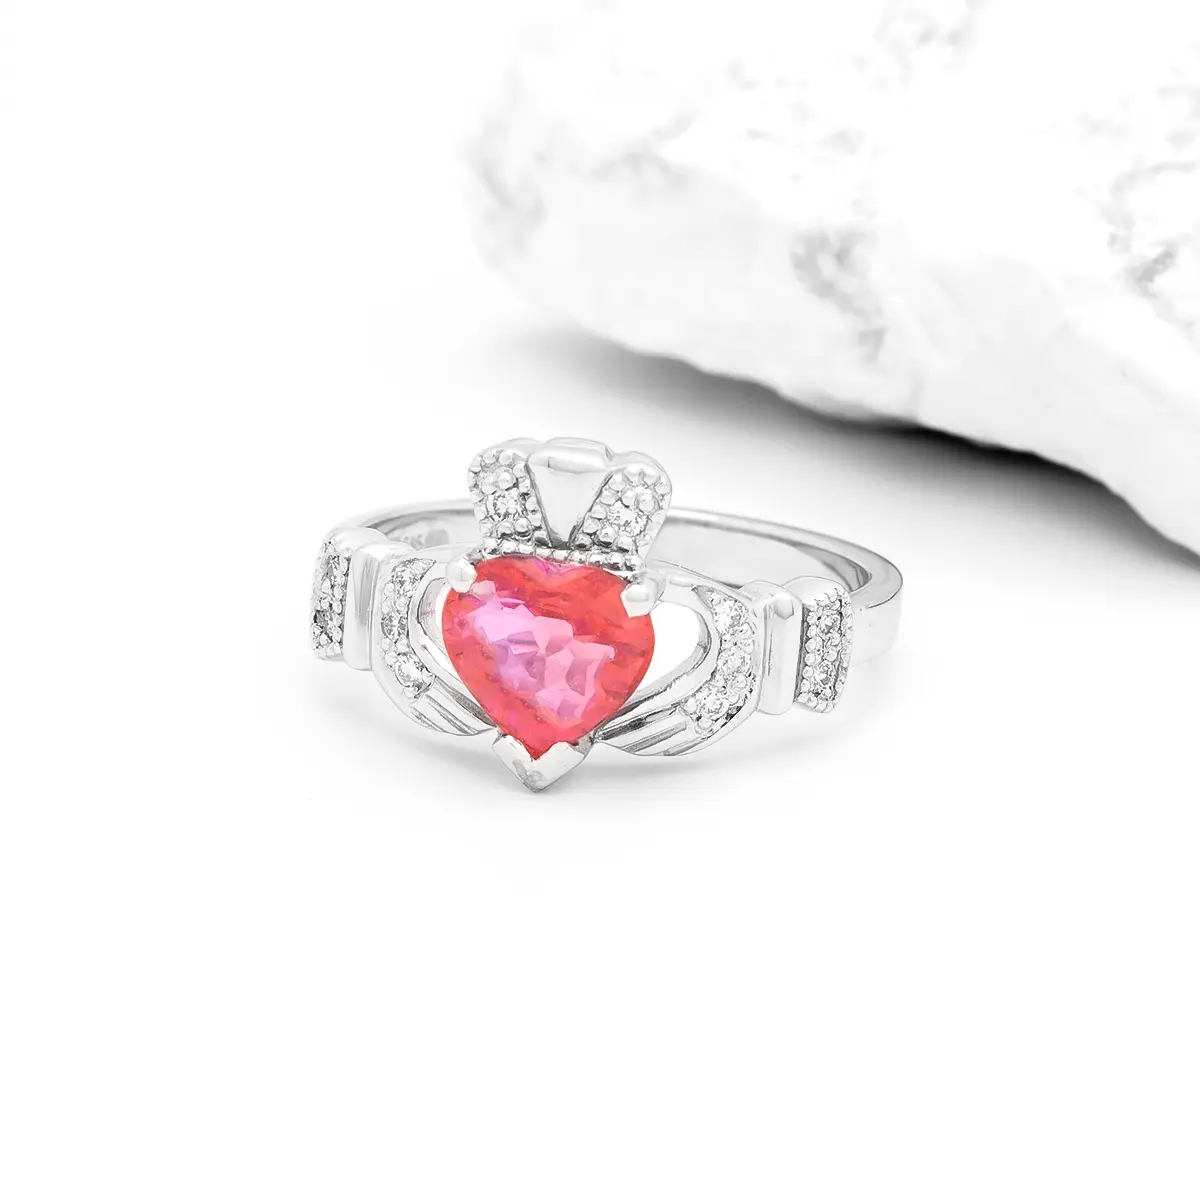 14K White Gold Claddagh Ring WIth Pink Sapphire Heart And Diamonds...